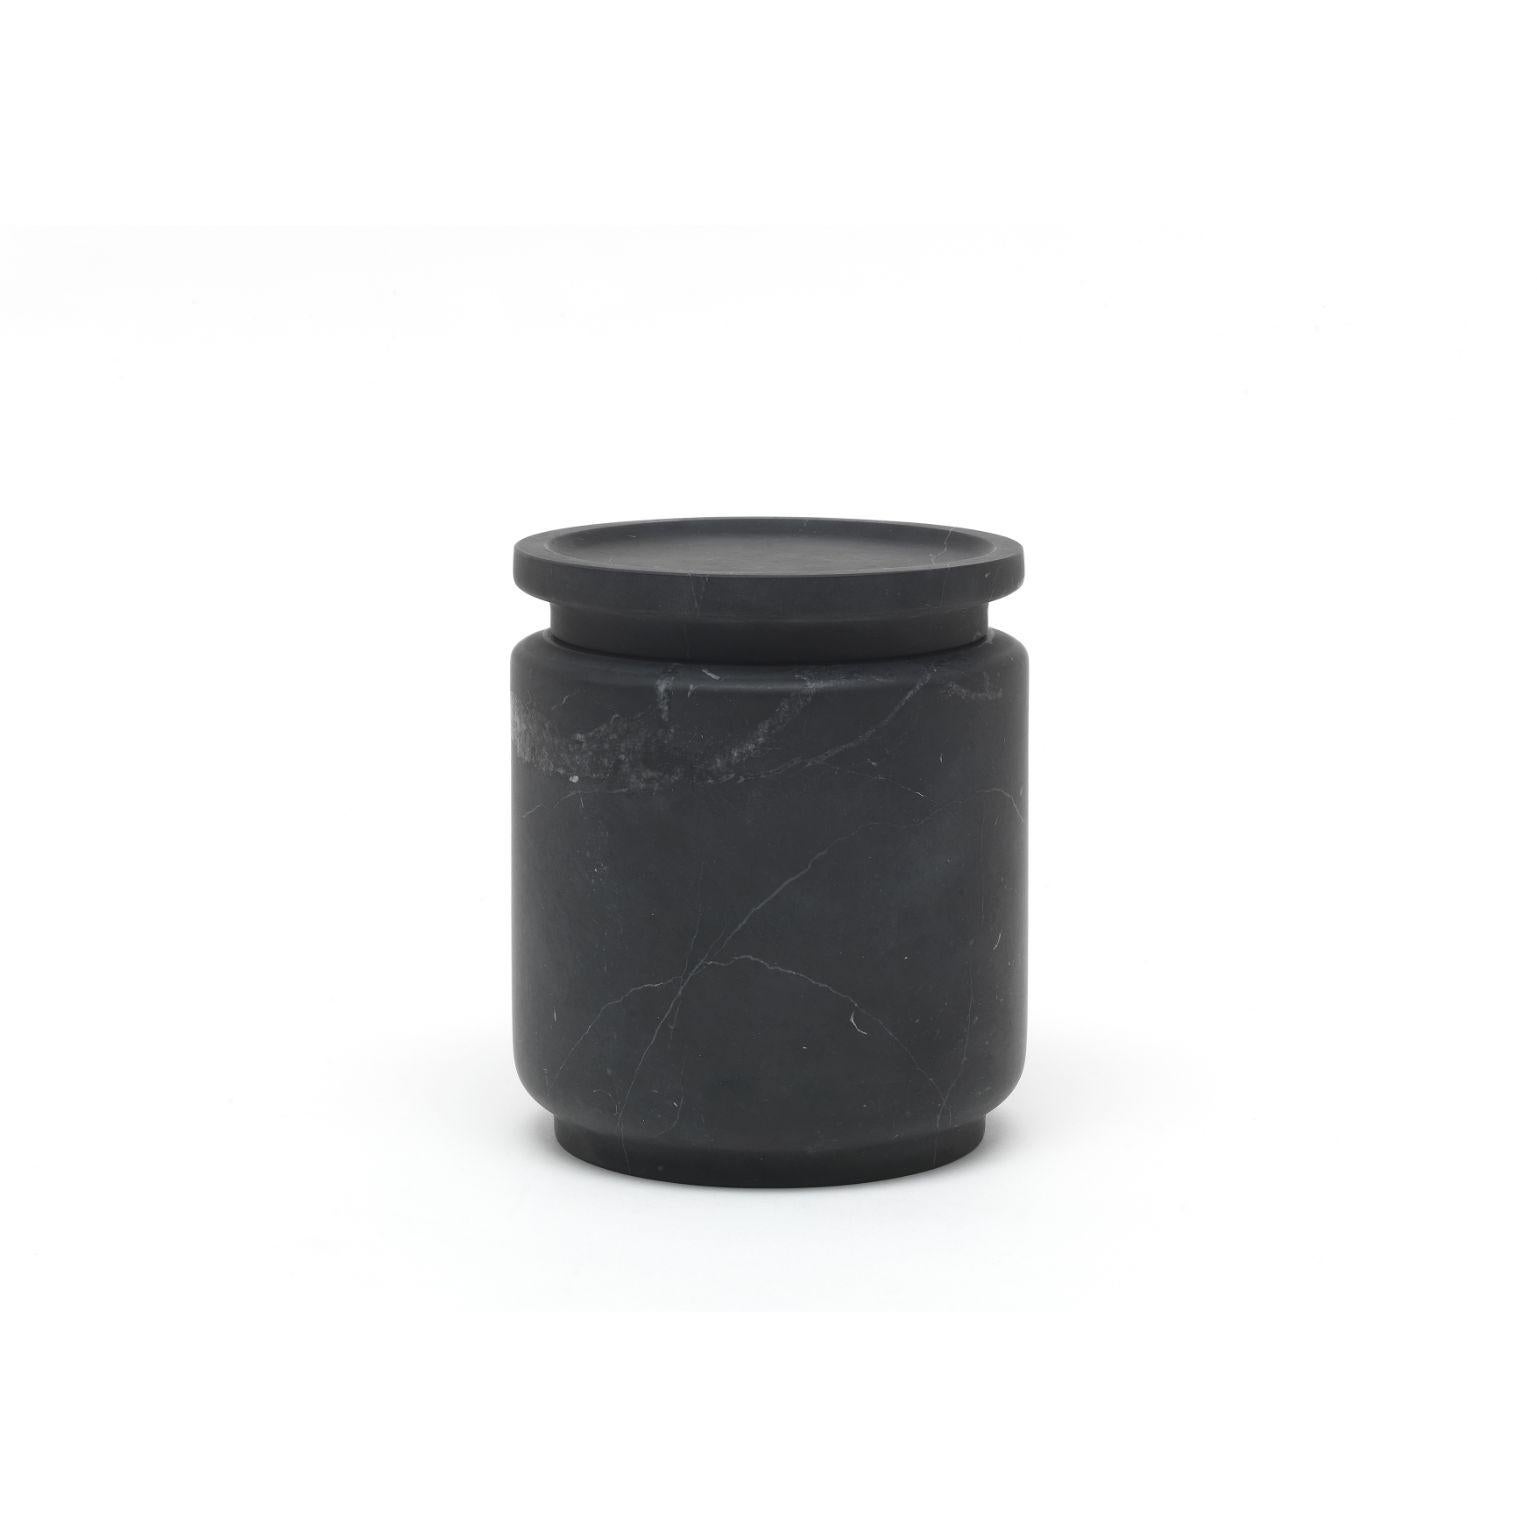 A set of 3 pyxis pots - black by Ivan Colominas
Pyxis Collection
Dimensions: 12.6 x 11, 12.6 x 14.5, 12.6 x 19 cm
Materials: Nero Marquinia

Also available: Bianco Michelangelo,

A refined collection articulated through cylinders that vary